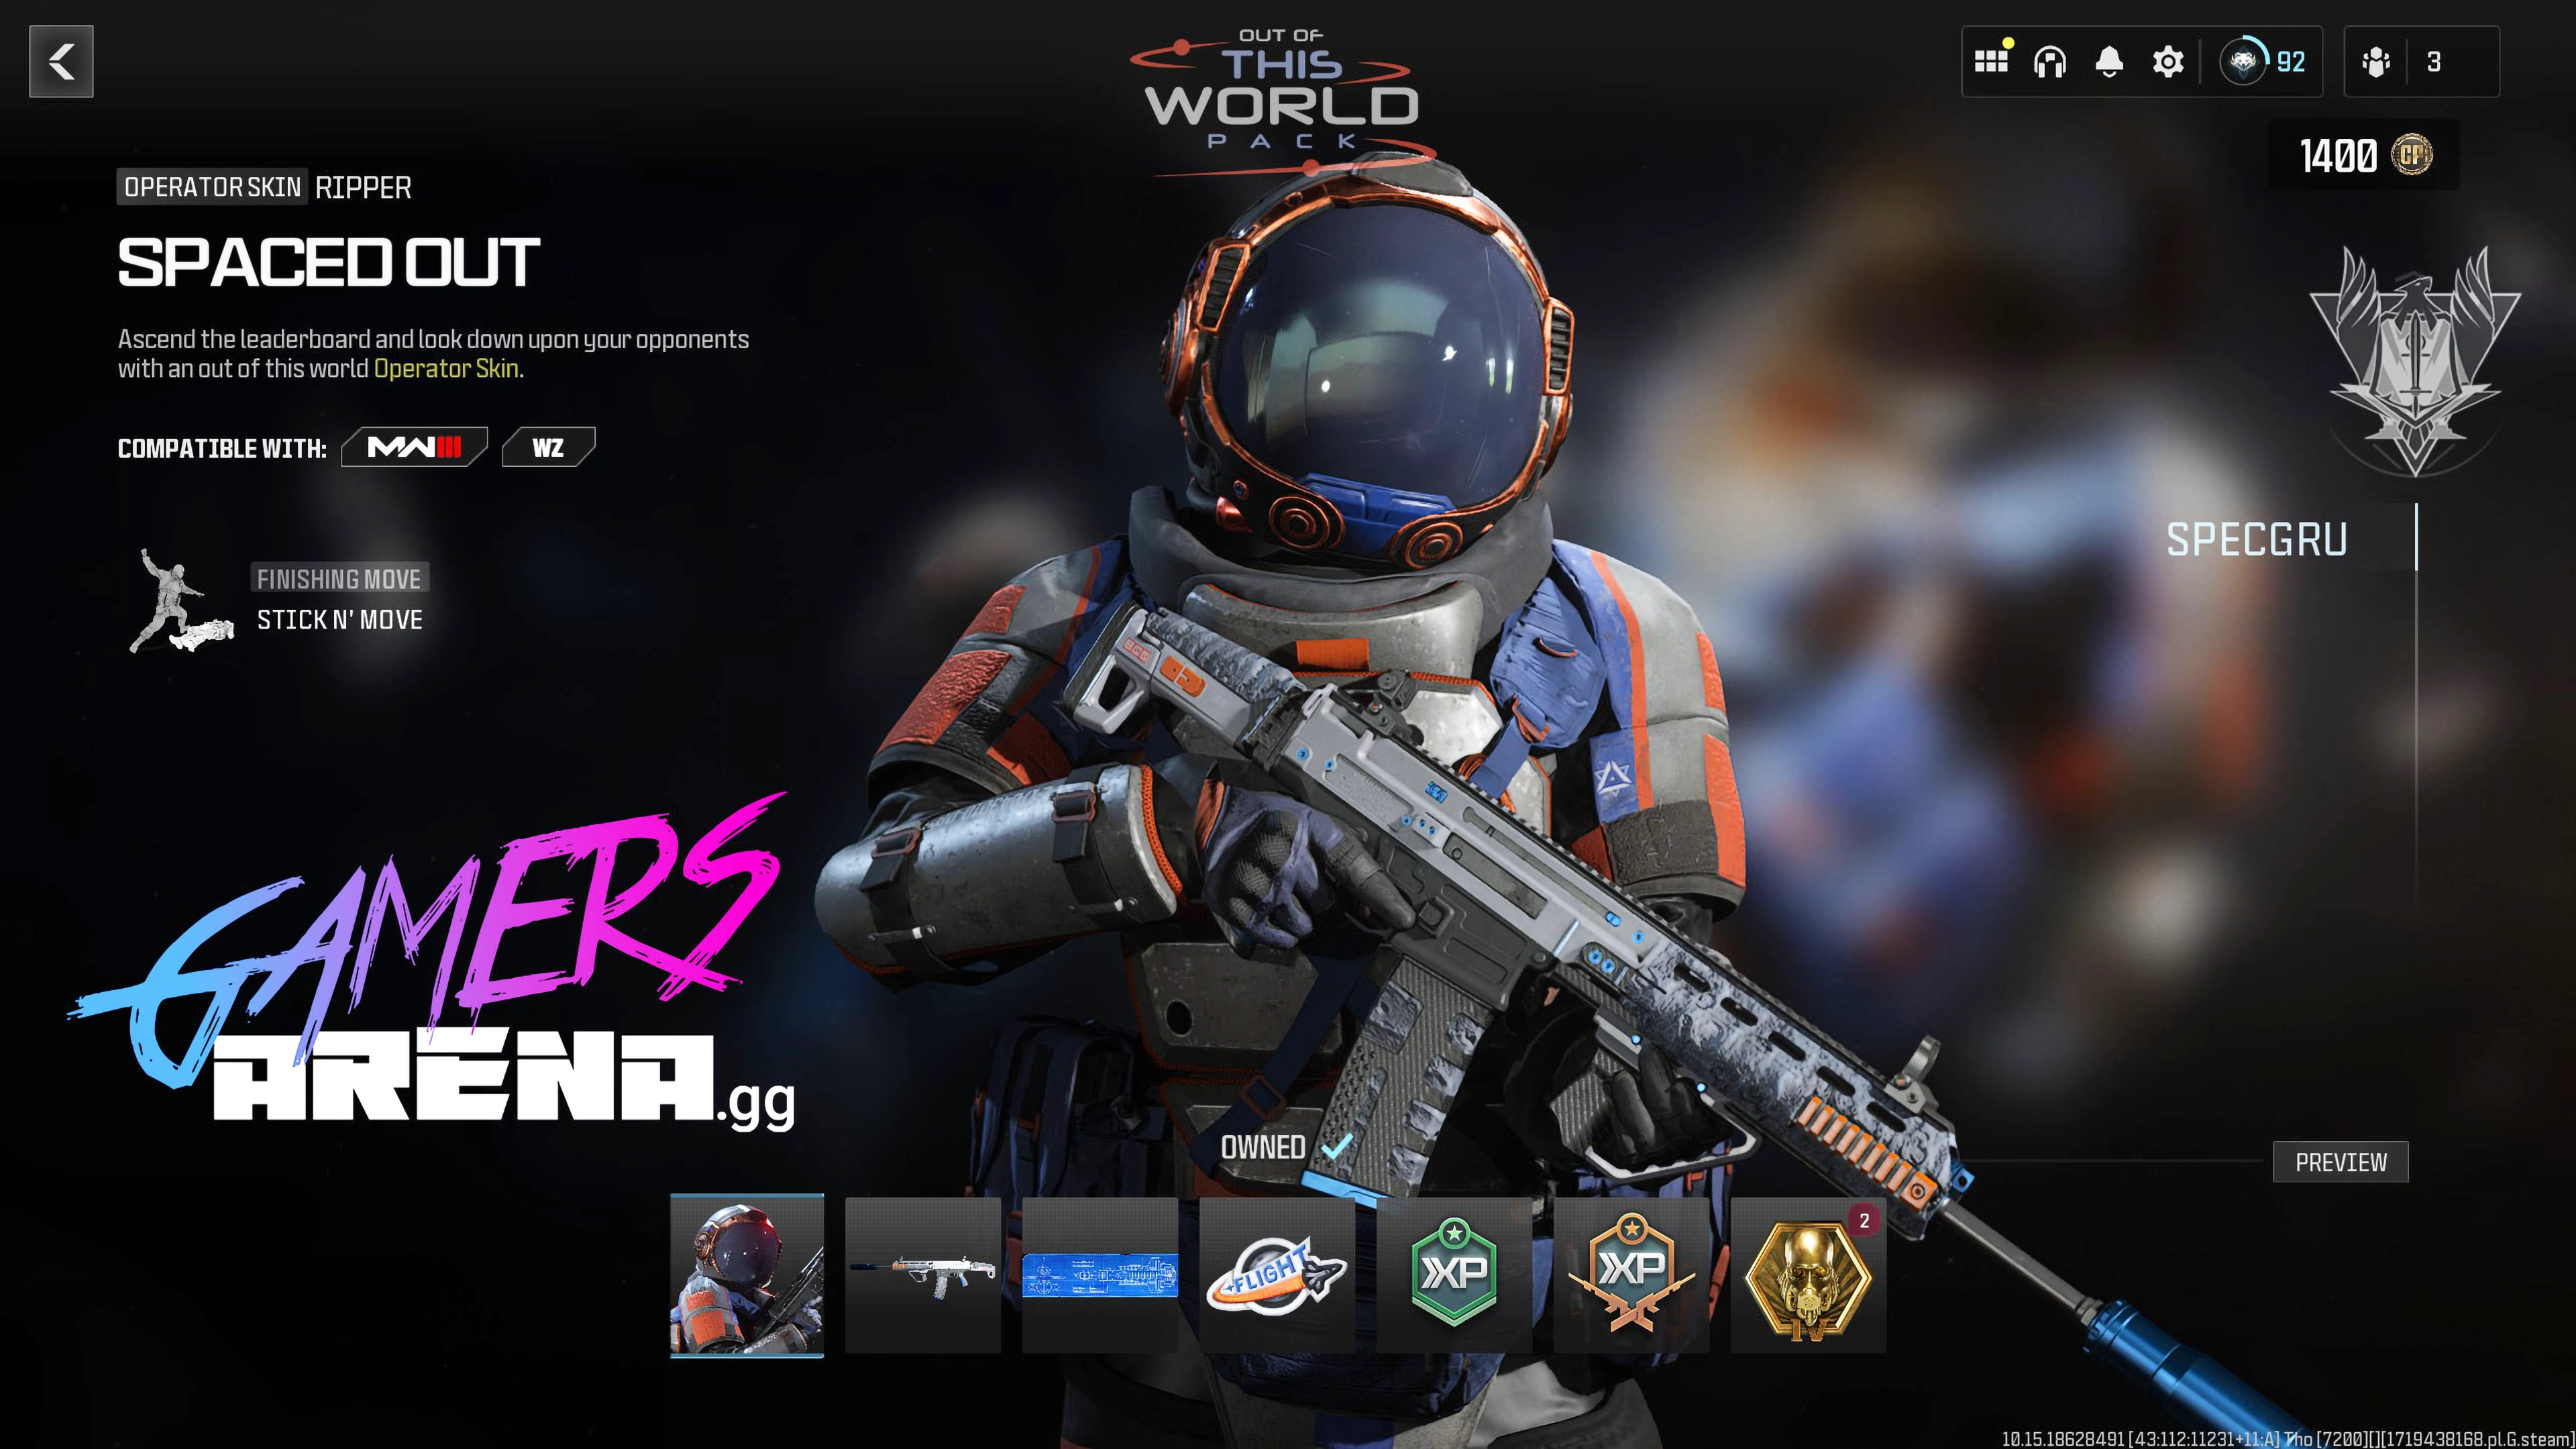 OUT OF THIS WORLD PACK Ripper Operator Skin Hard Unlocked PS XBOX PC - Ultra Rare